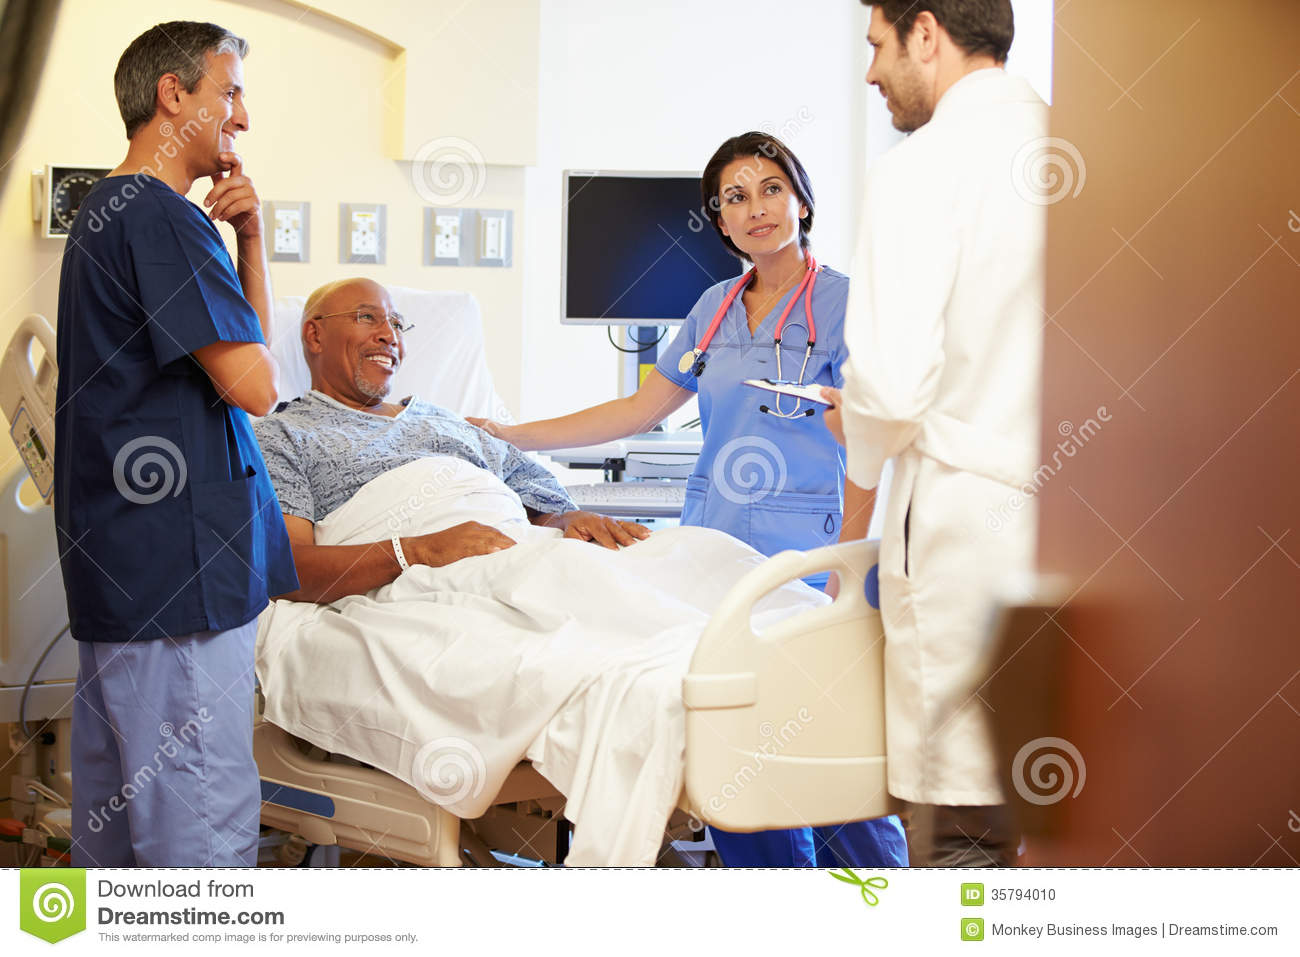 Medical Team Meeting With Senior Man In Hospital Room Looking At Each